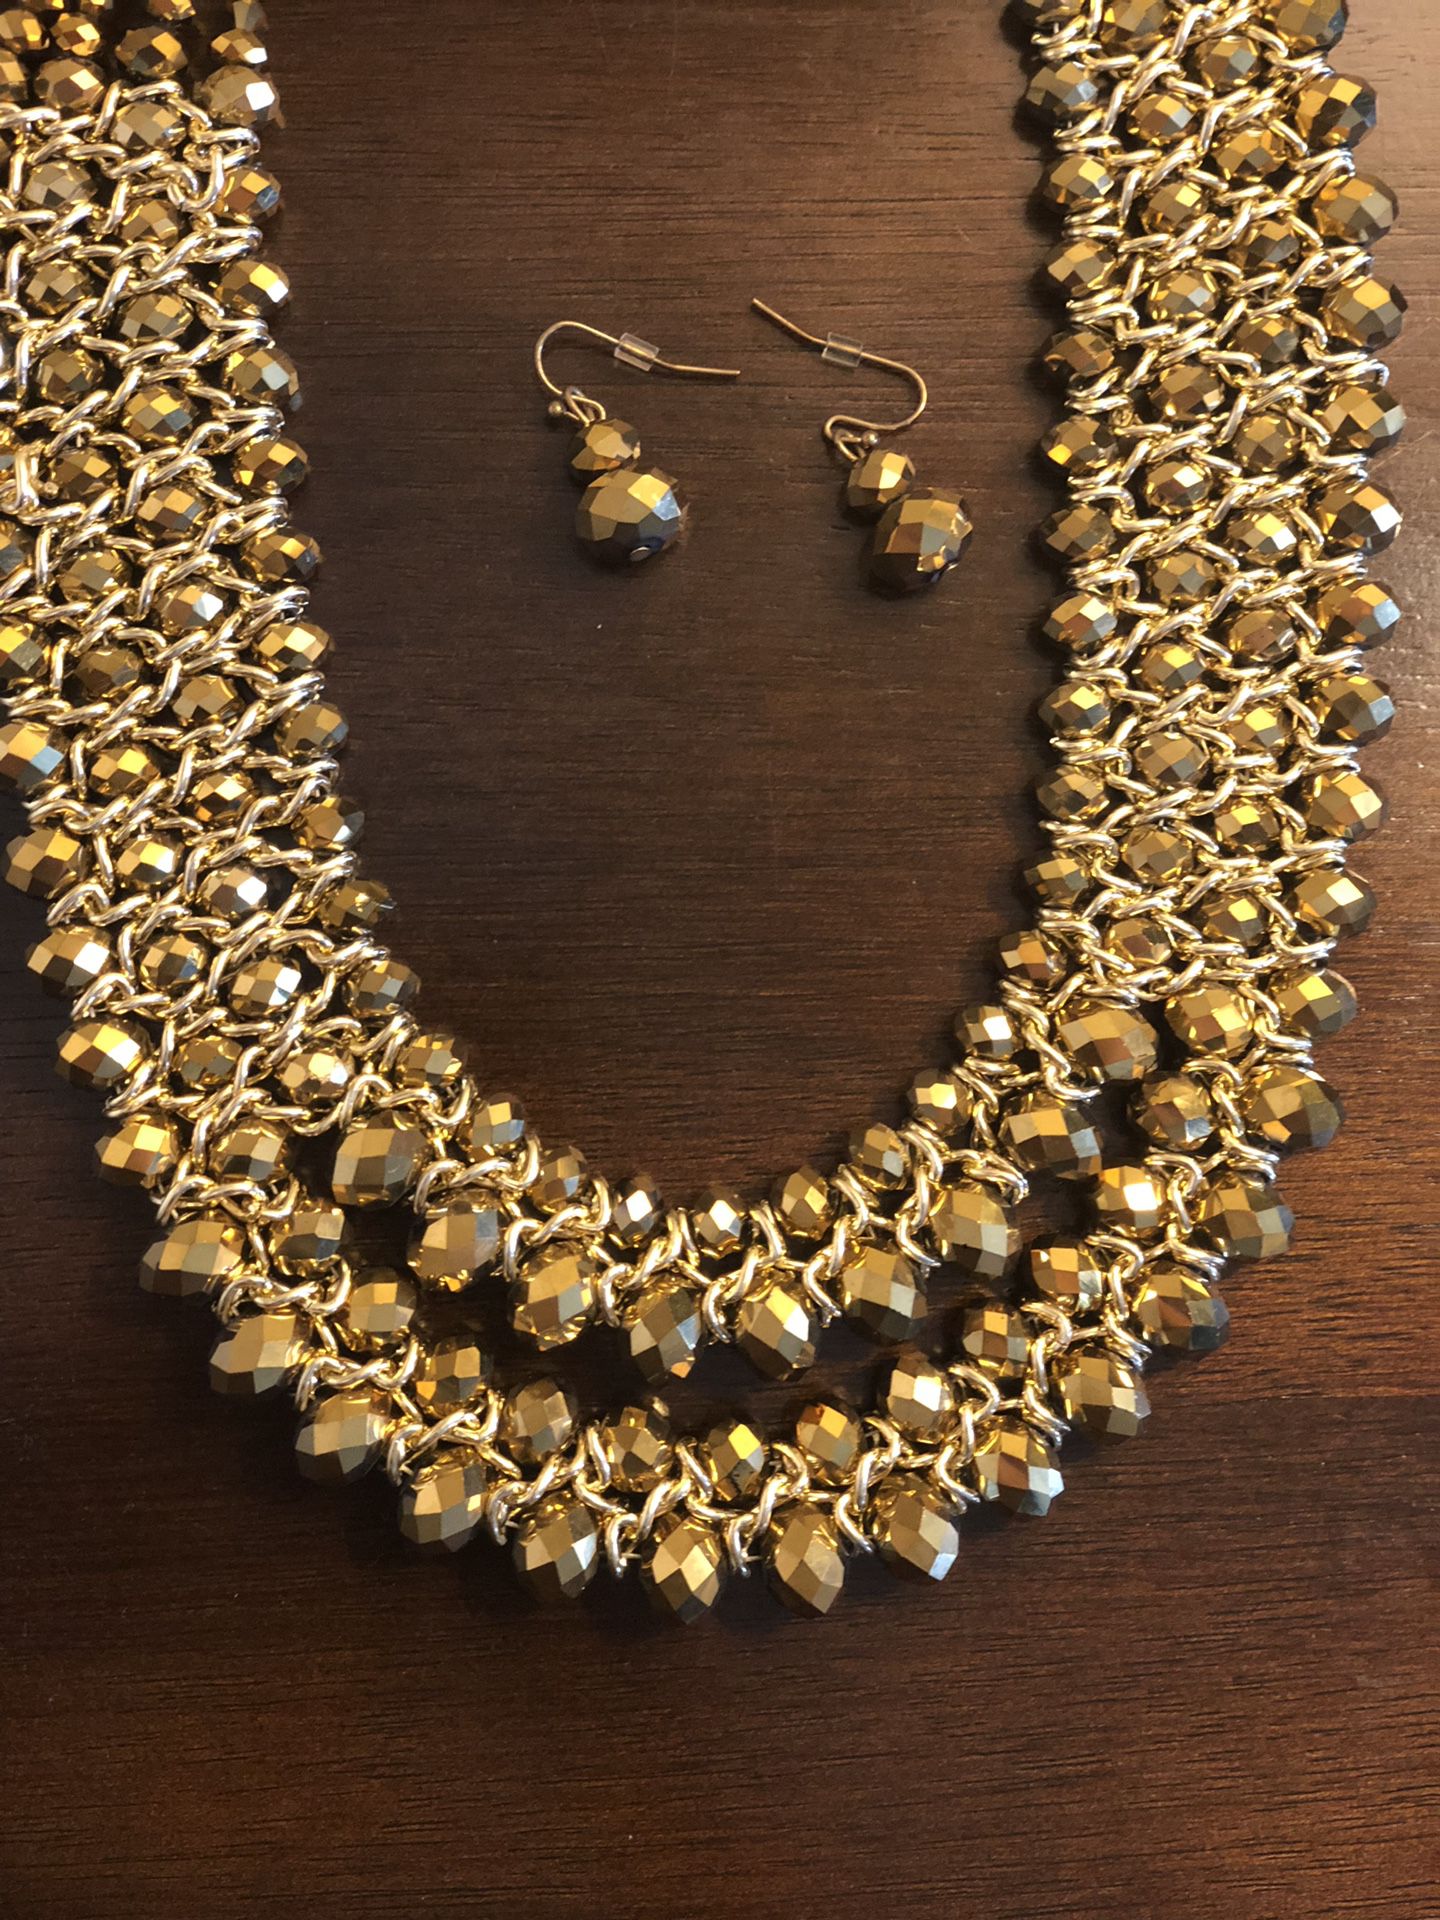 Golden Beads Necklace And Earring Jewelry Set NWOT